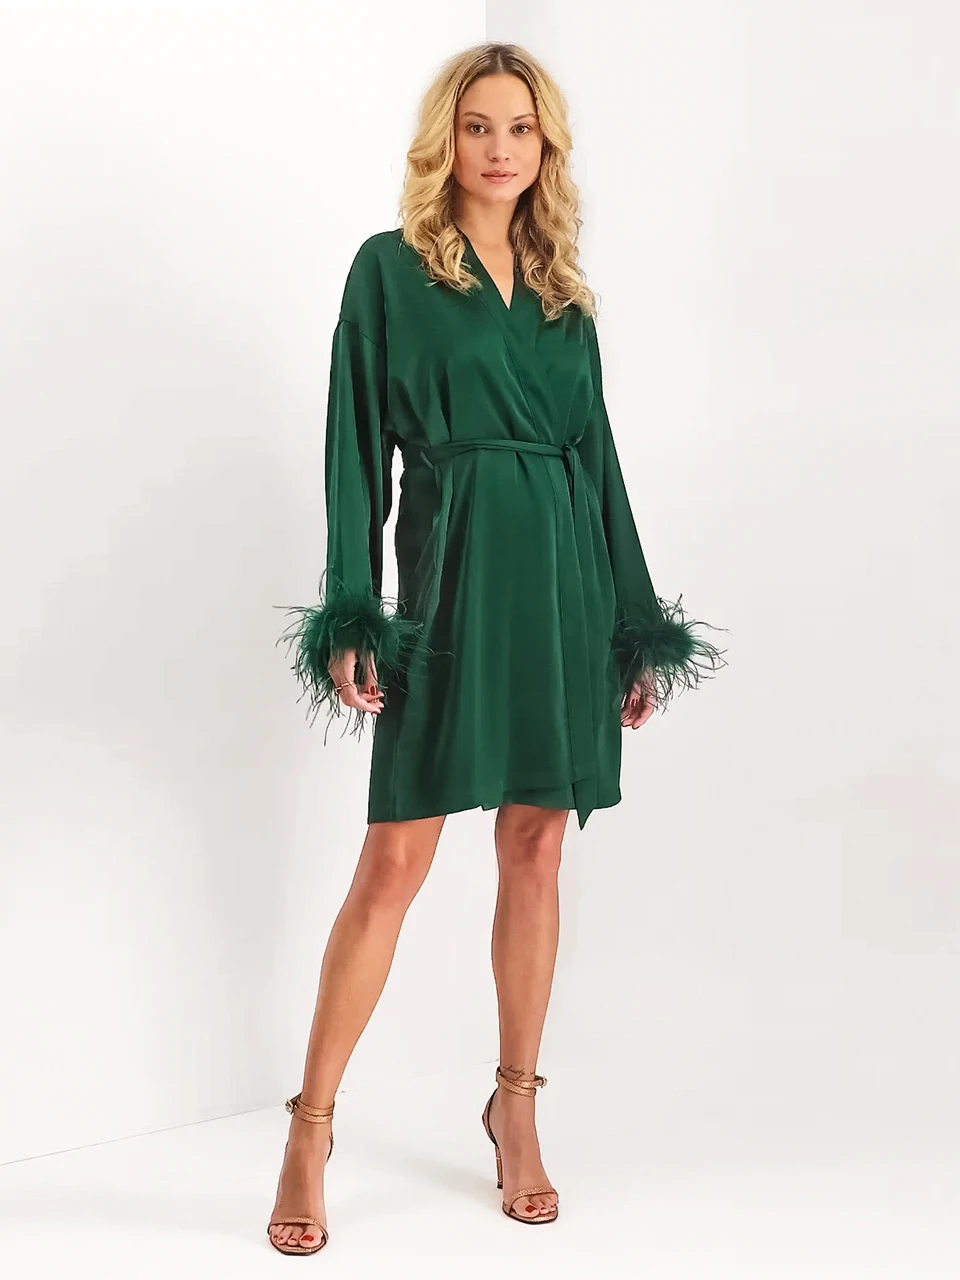 

Linad Feather Spliced Robes Green Satin Women's Dressing Gown V-Neck Sleepwear Long Sleeves Pajamas For Women Mini Bathrobes New